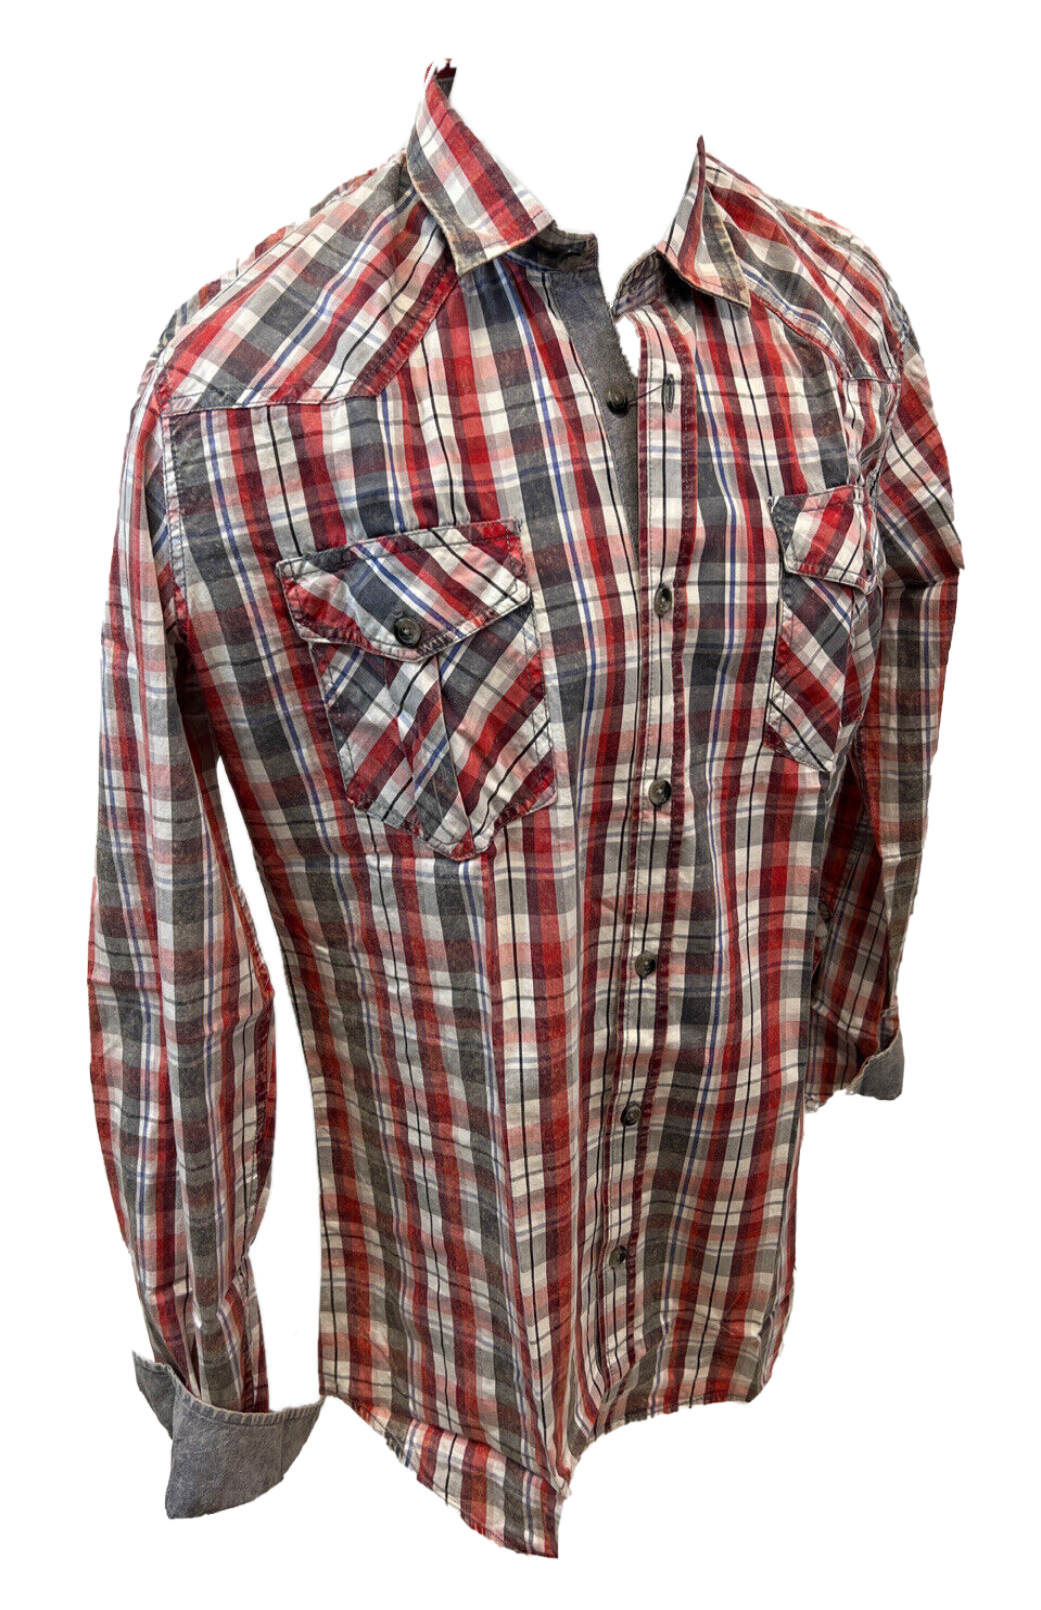 Men's RODEO WESTERN COUNTRY RED GREY WHITE BLUE PLAID BUTTON UP FRONT POCKETS Shirt Lucky Cowboy